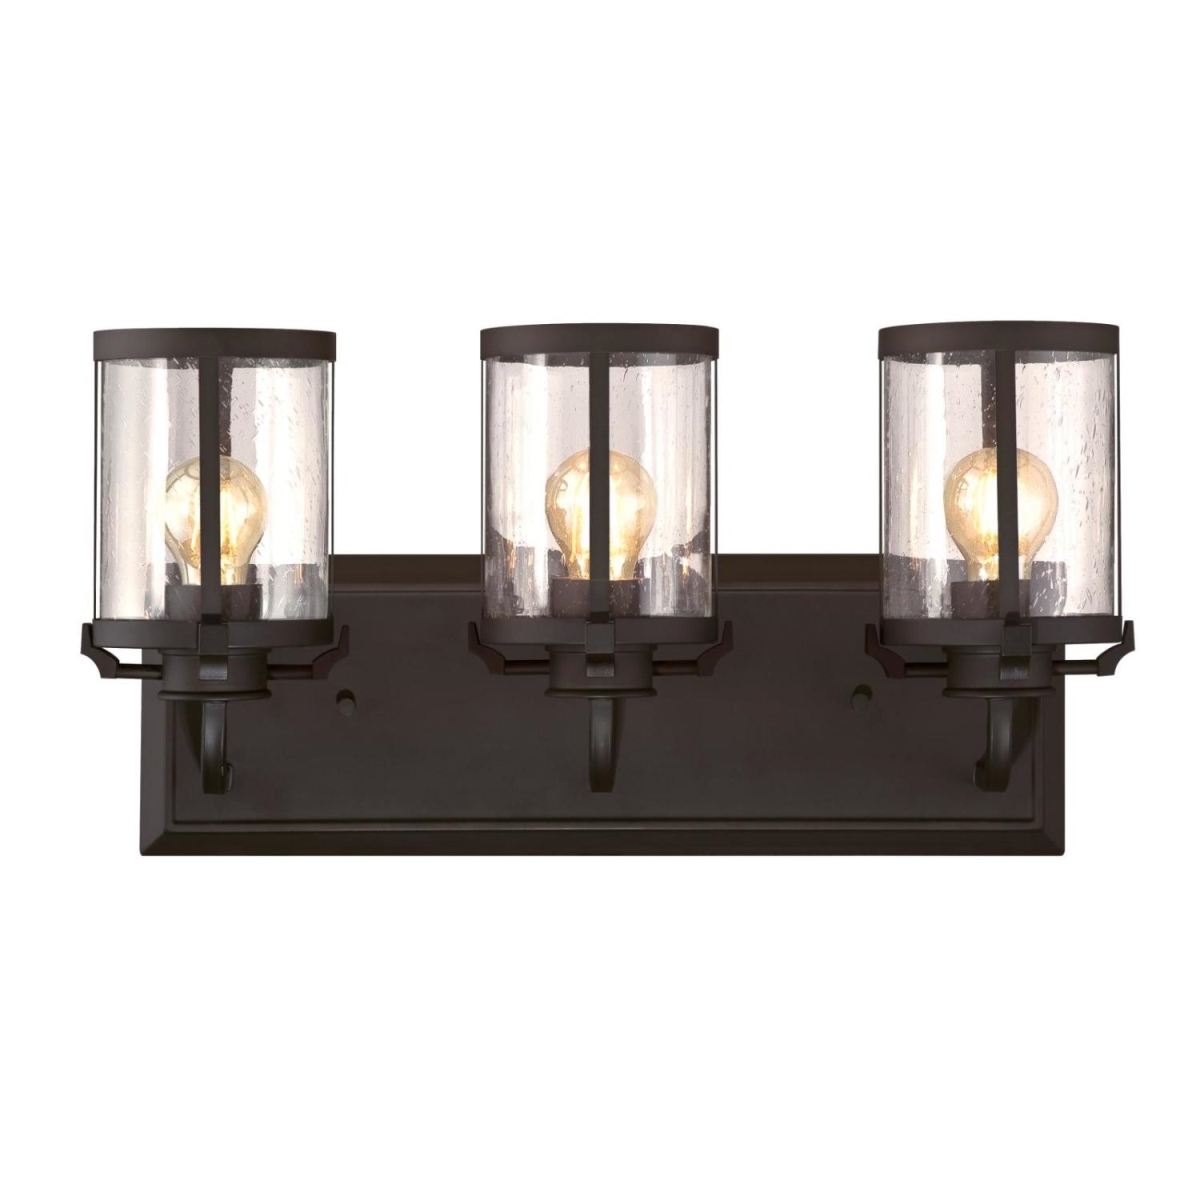 6368100 3 Light Wall Fixture With Clear Seeded Glass - Oil Rubbed Bronze